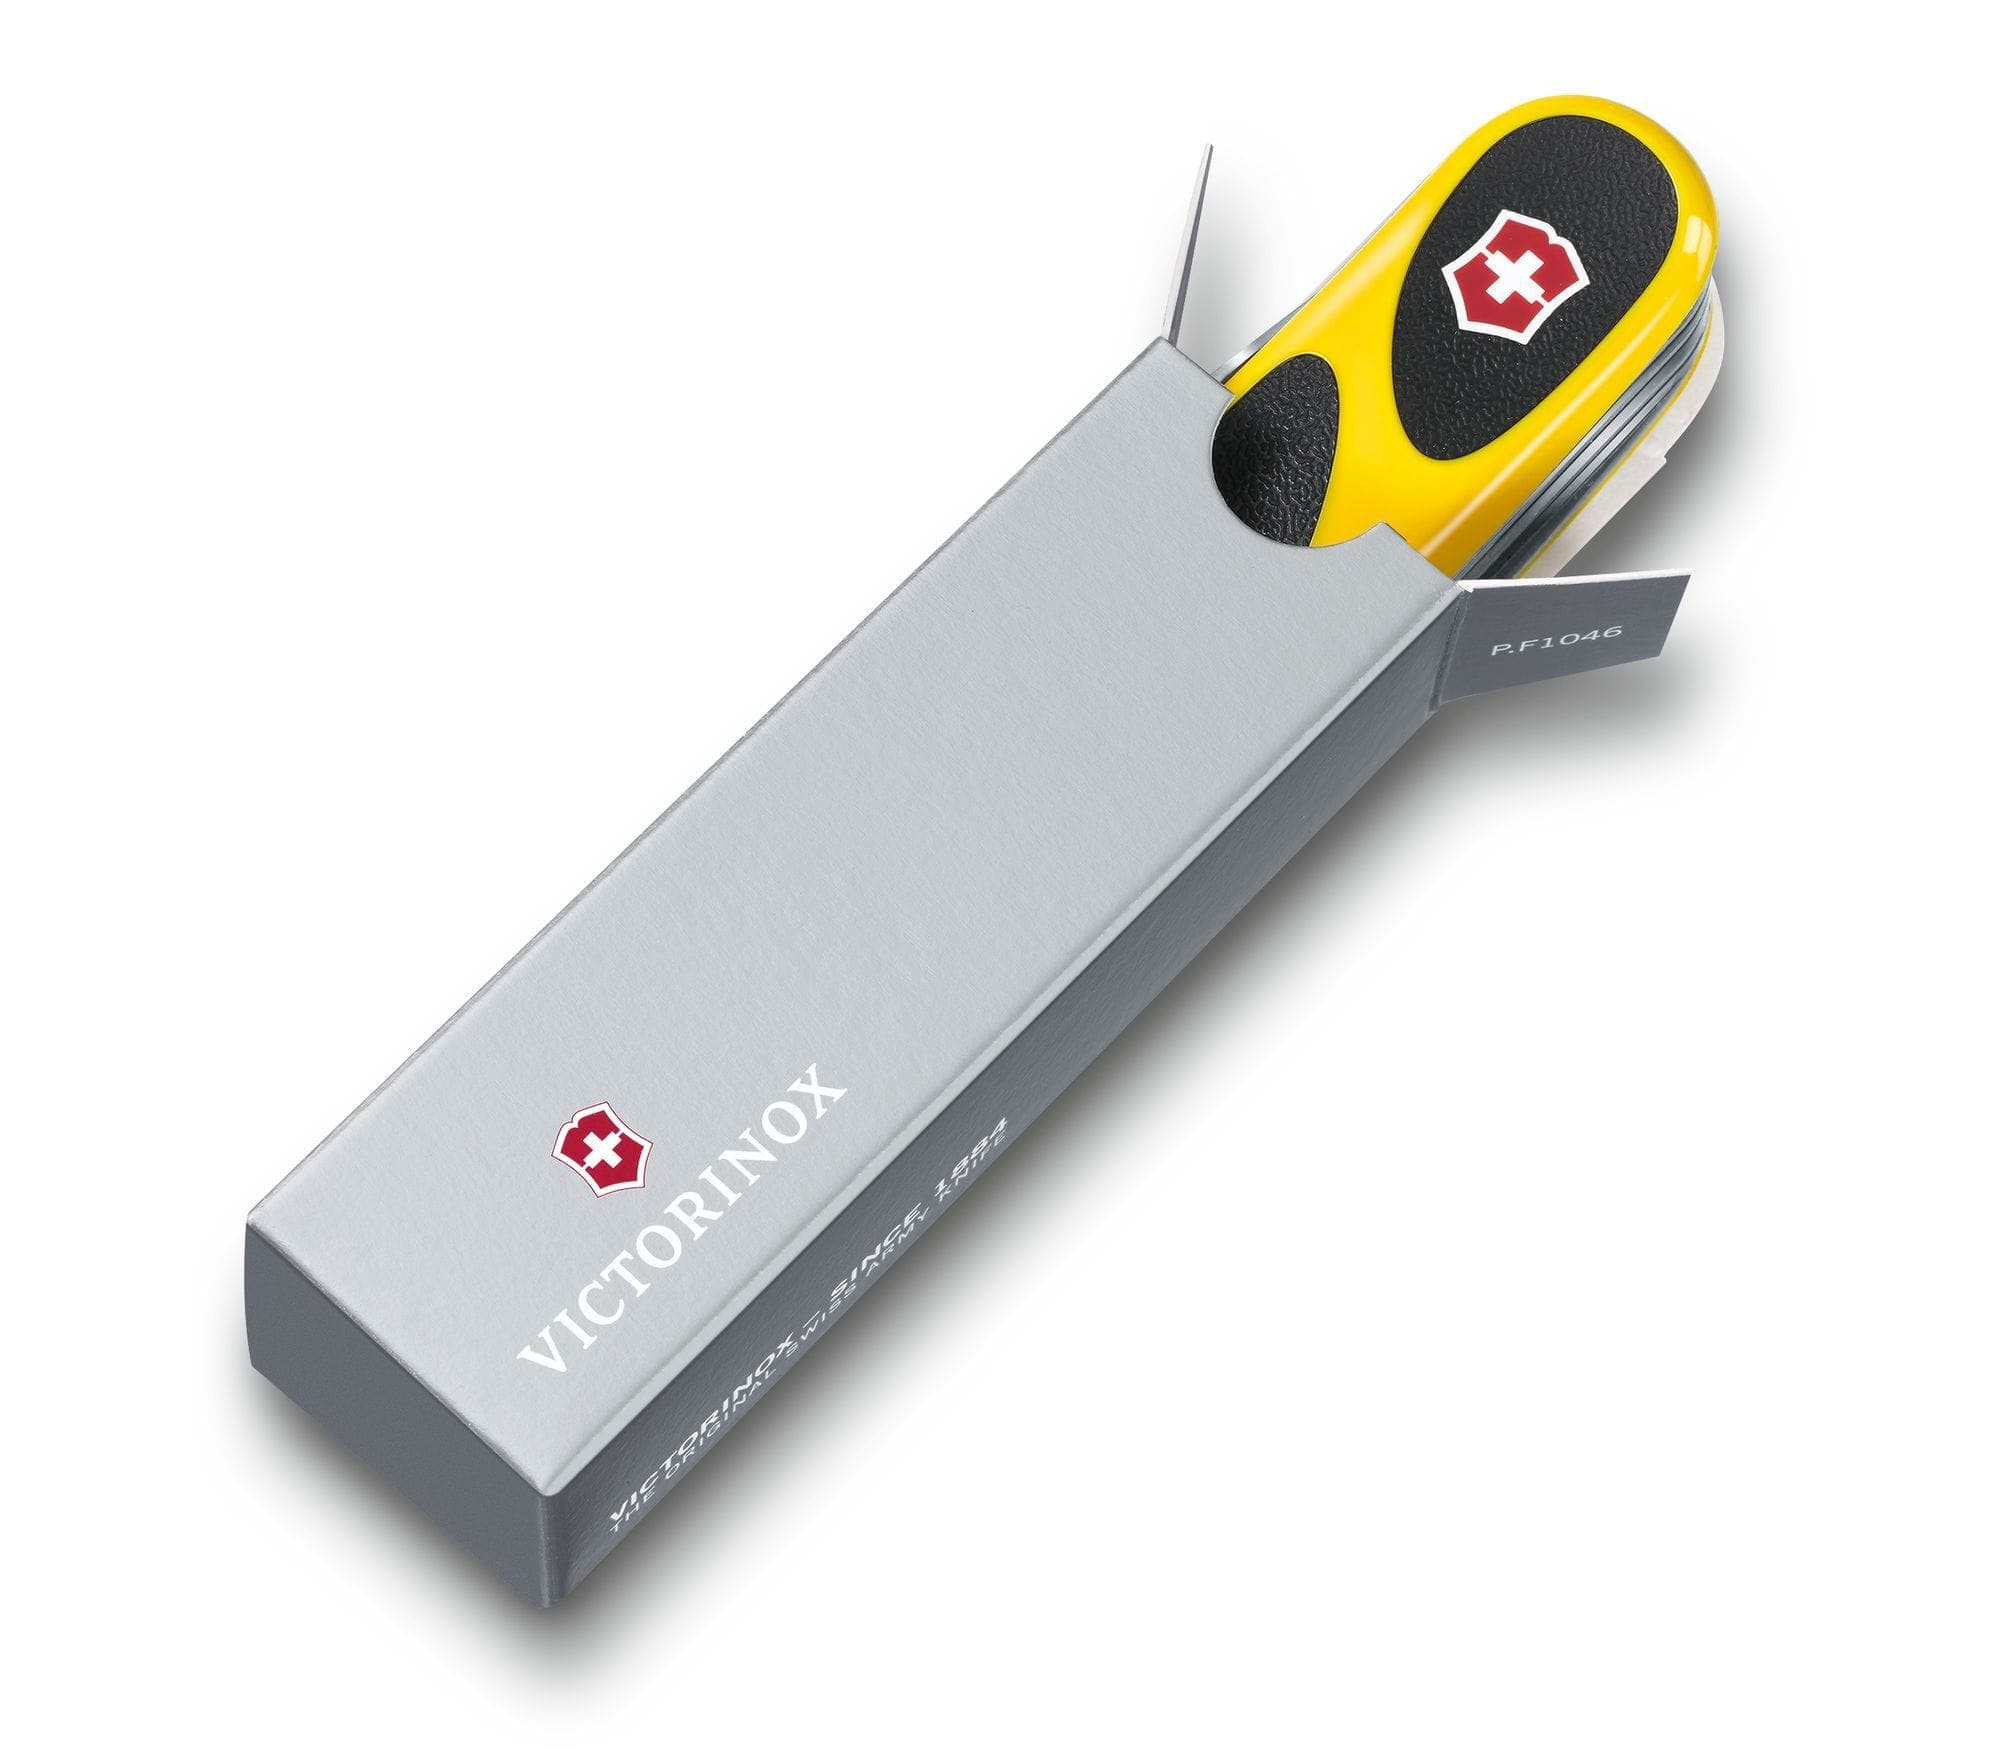 Victorinox Swiss Army Knife Evogrip S18 85mm Yellow/Black With 15 Functions - 2.4913.SC8